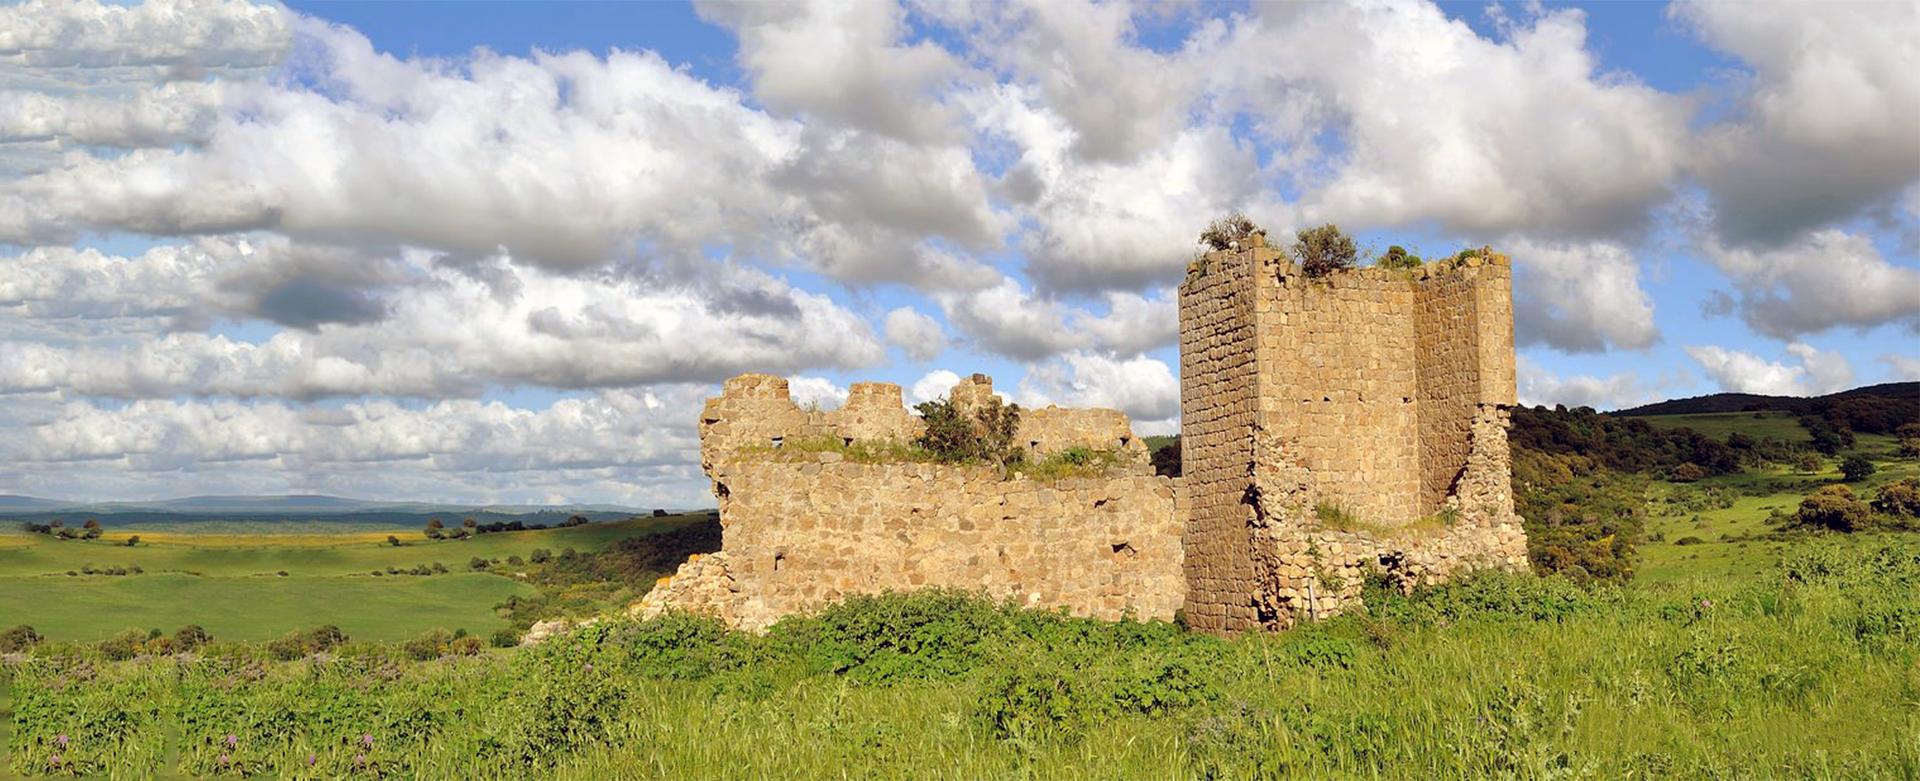 Ancient Ruins of Leopoli - Cencelle